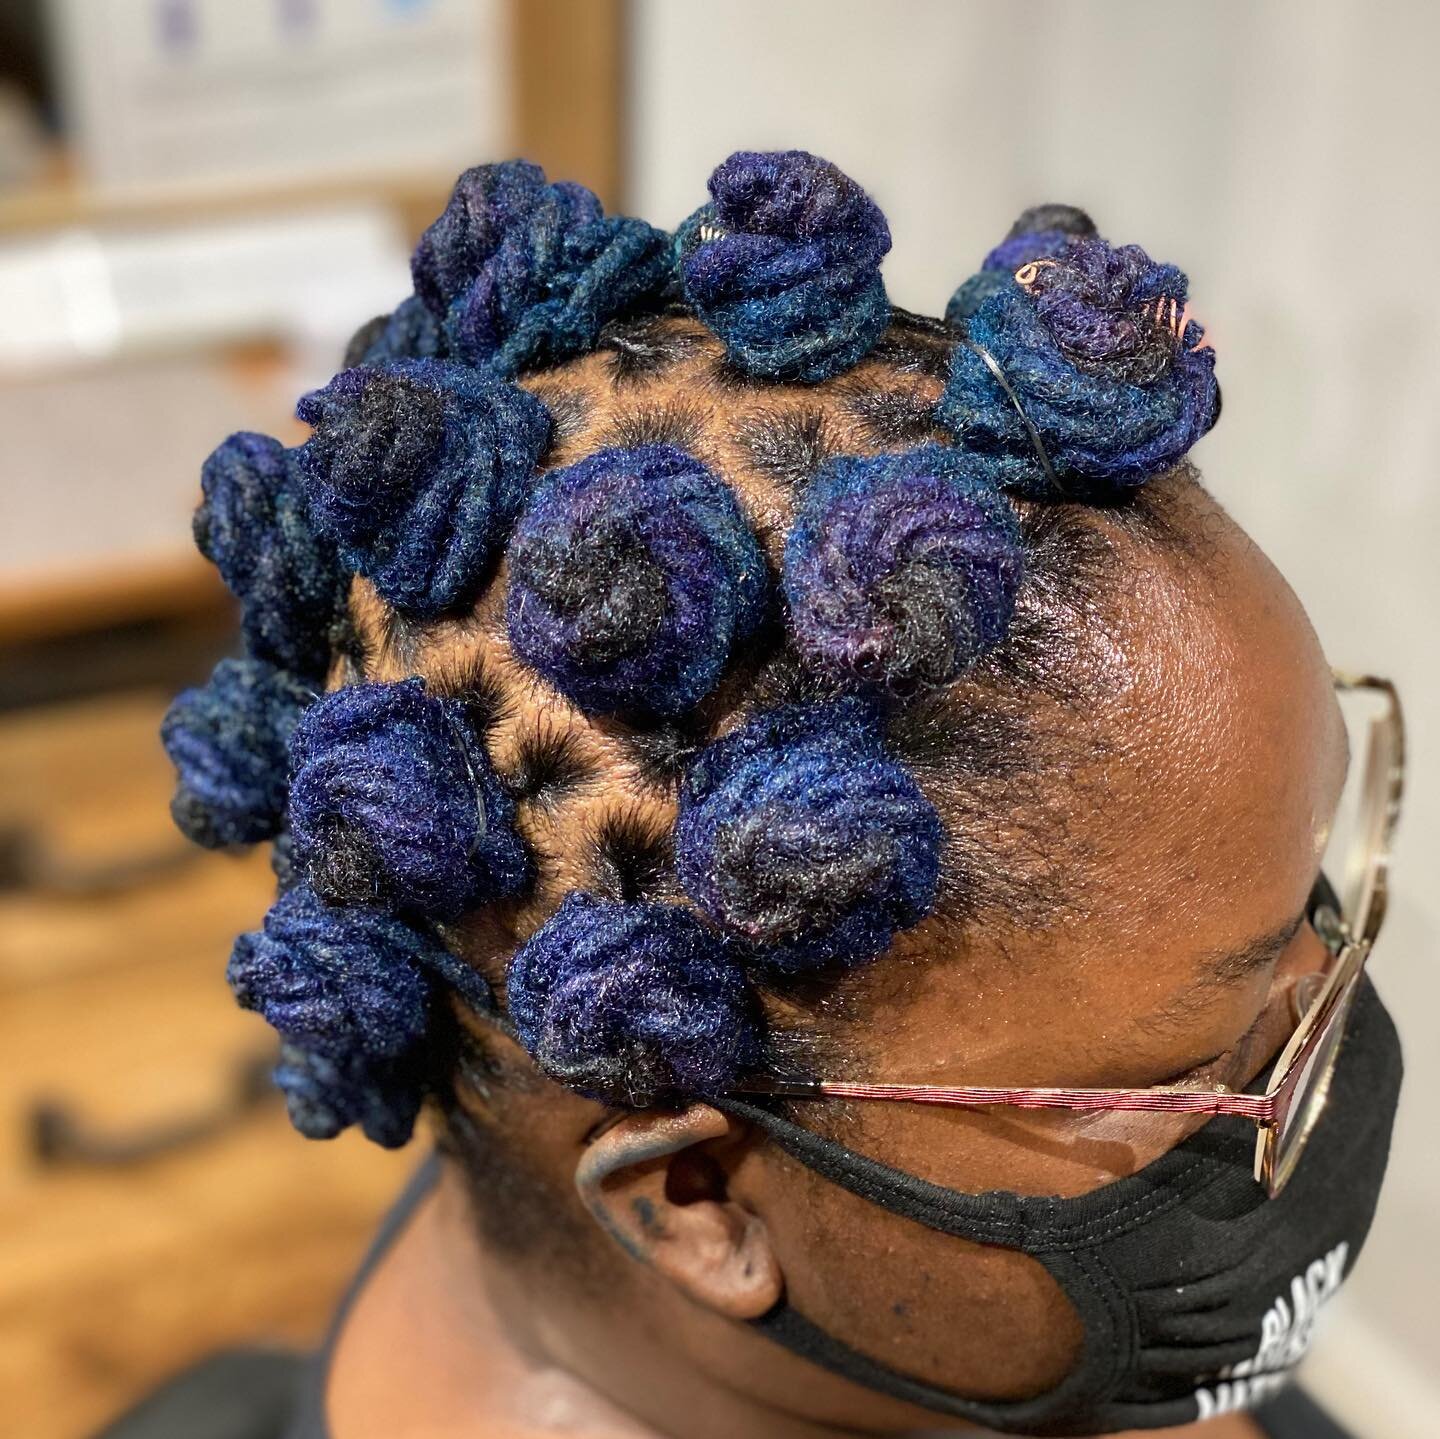 Had to switch it up a bit 💙💜 Swipe ⬅️ to see the before 
#locs 
#stllocs
#webstergroves 
#stl 
#theblvdhairco 
#naturalhair 
#bantuknots